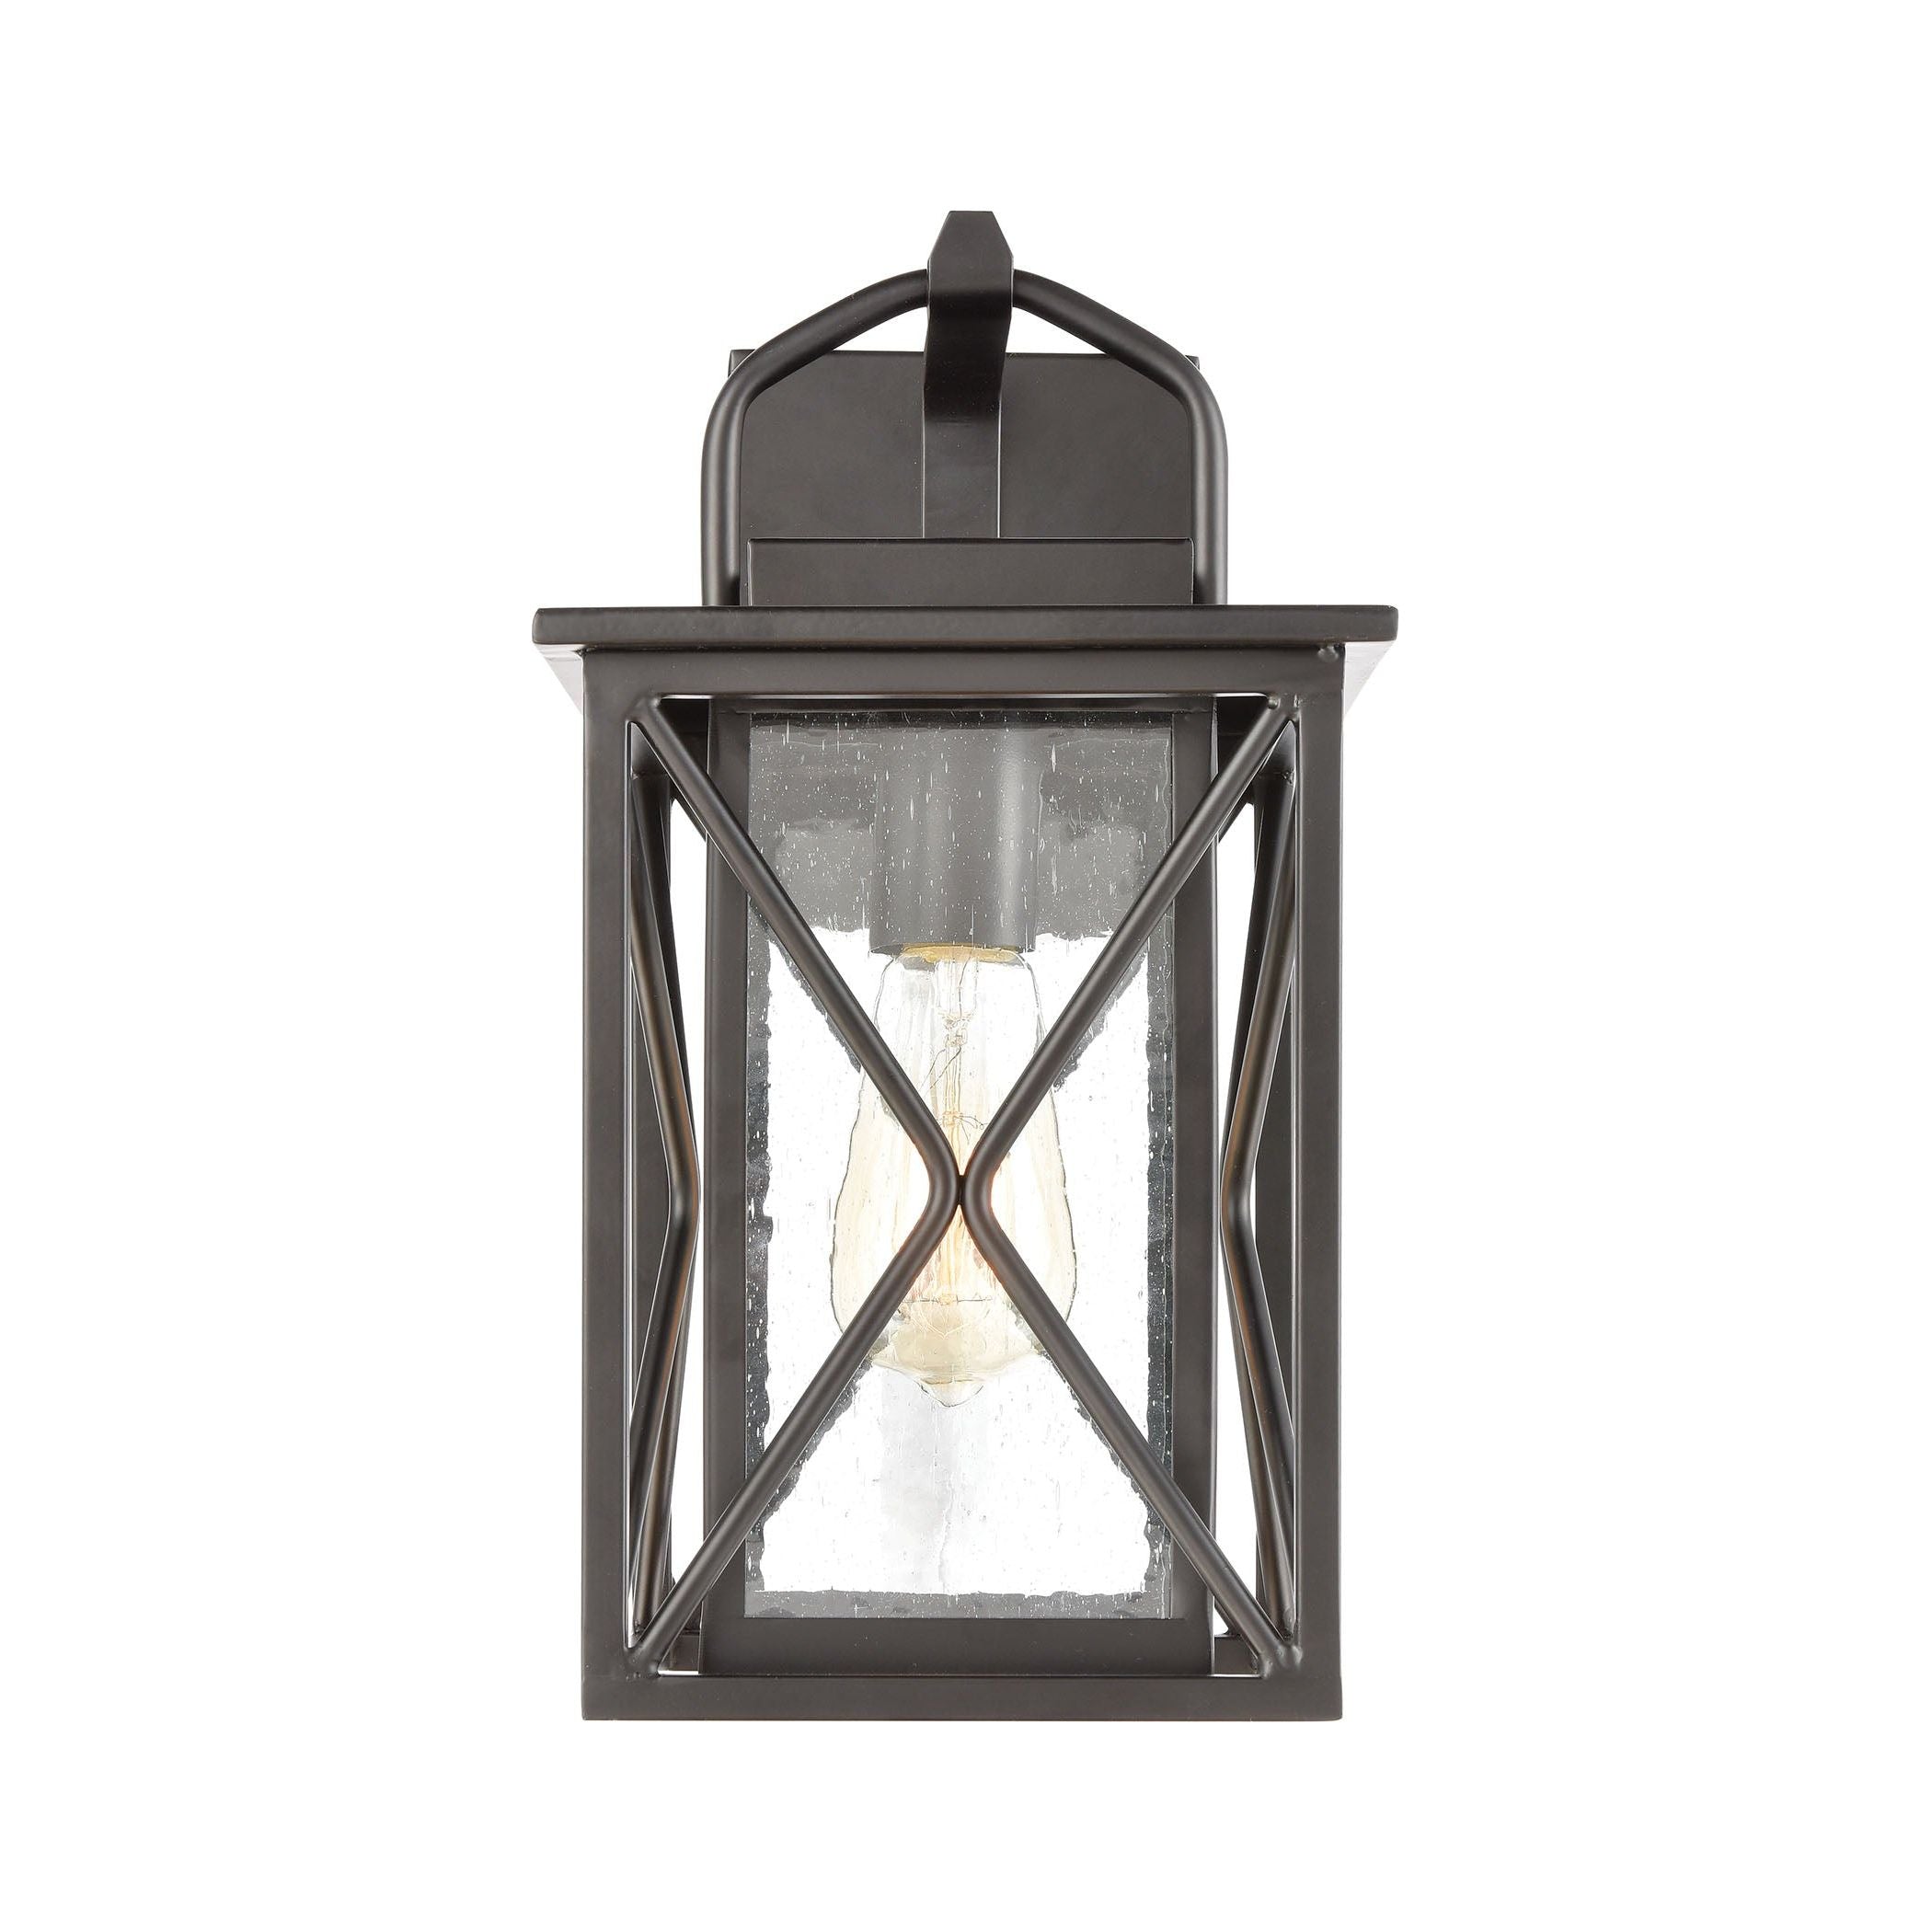 Carriage-Light 13" High 1-Light Outdoor Sconce